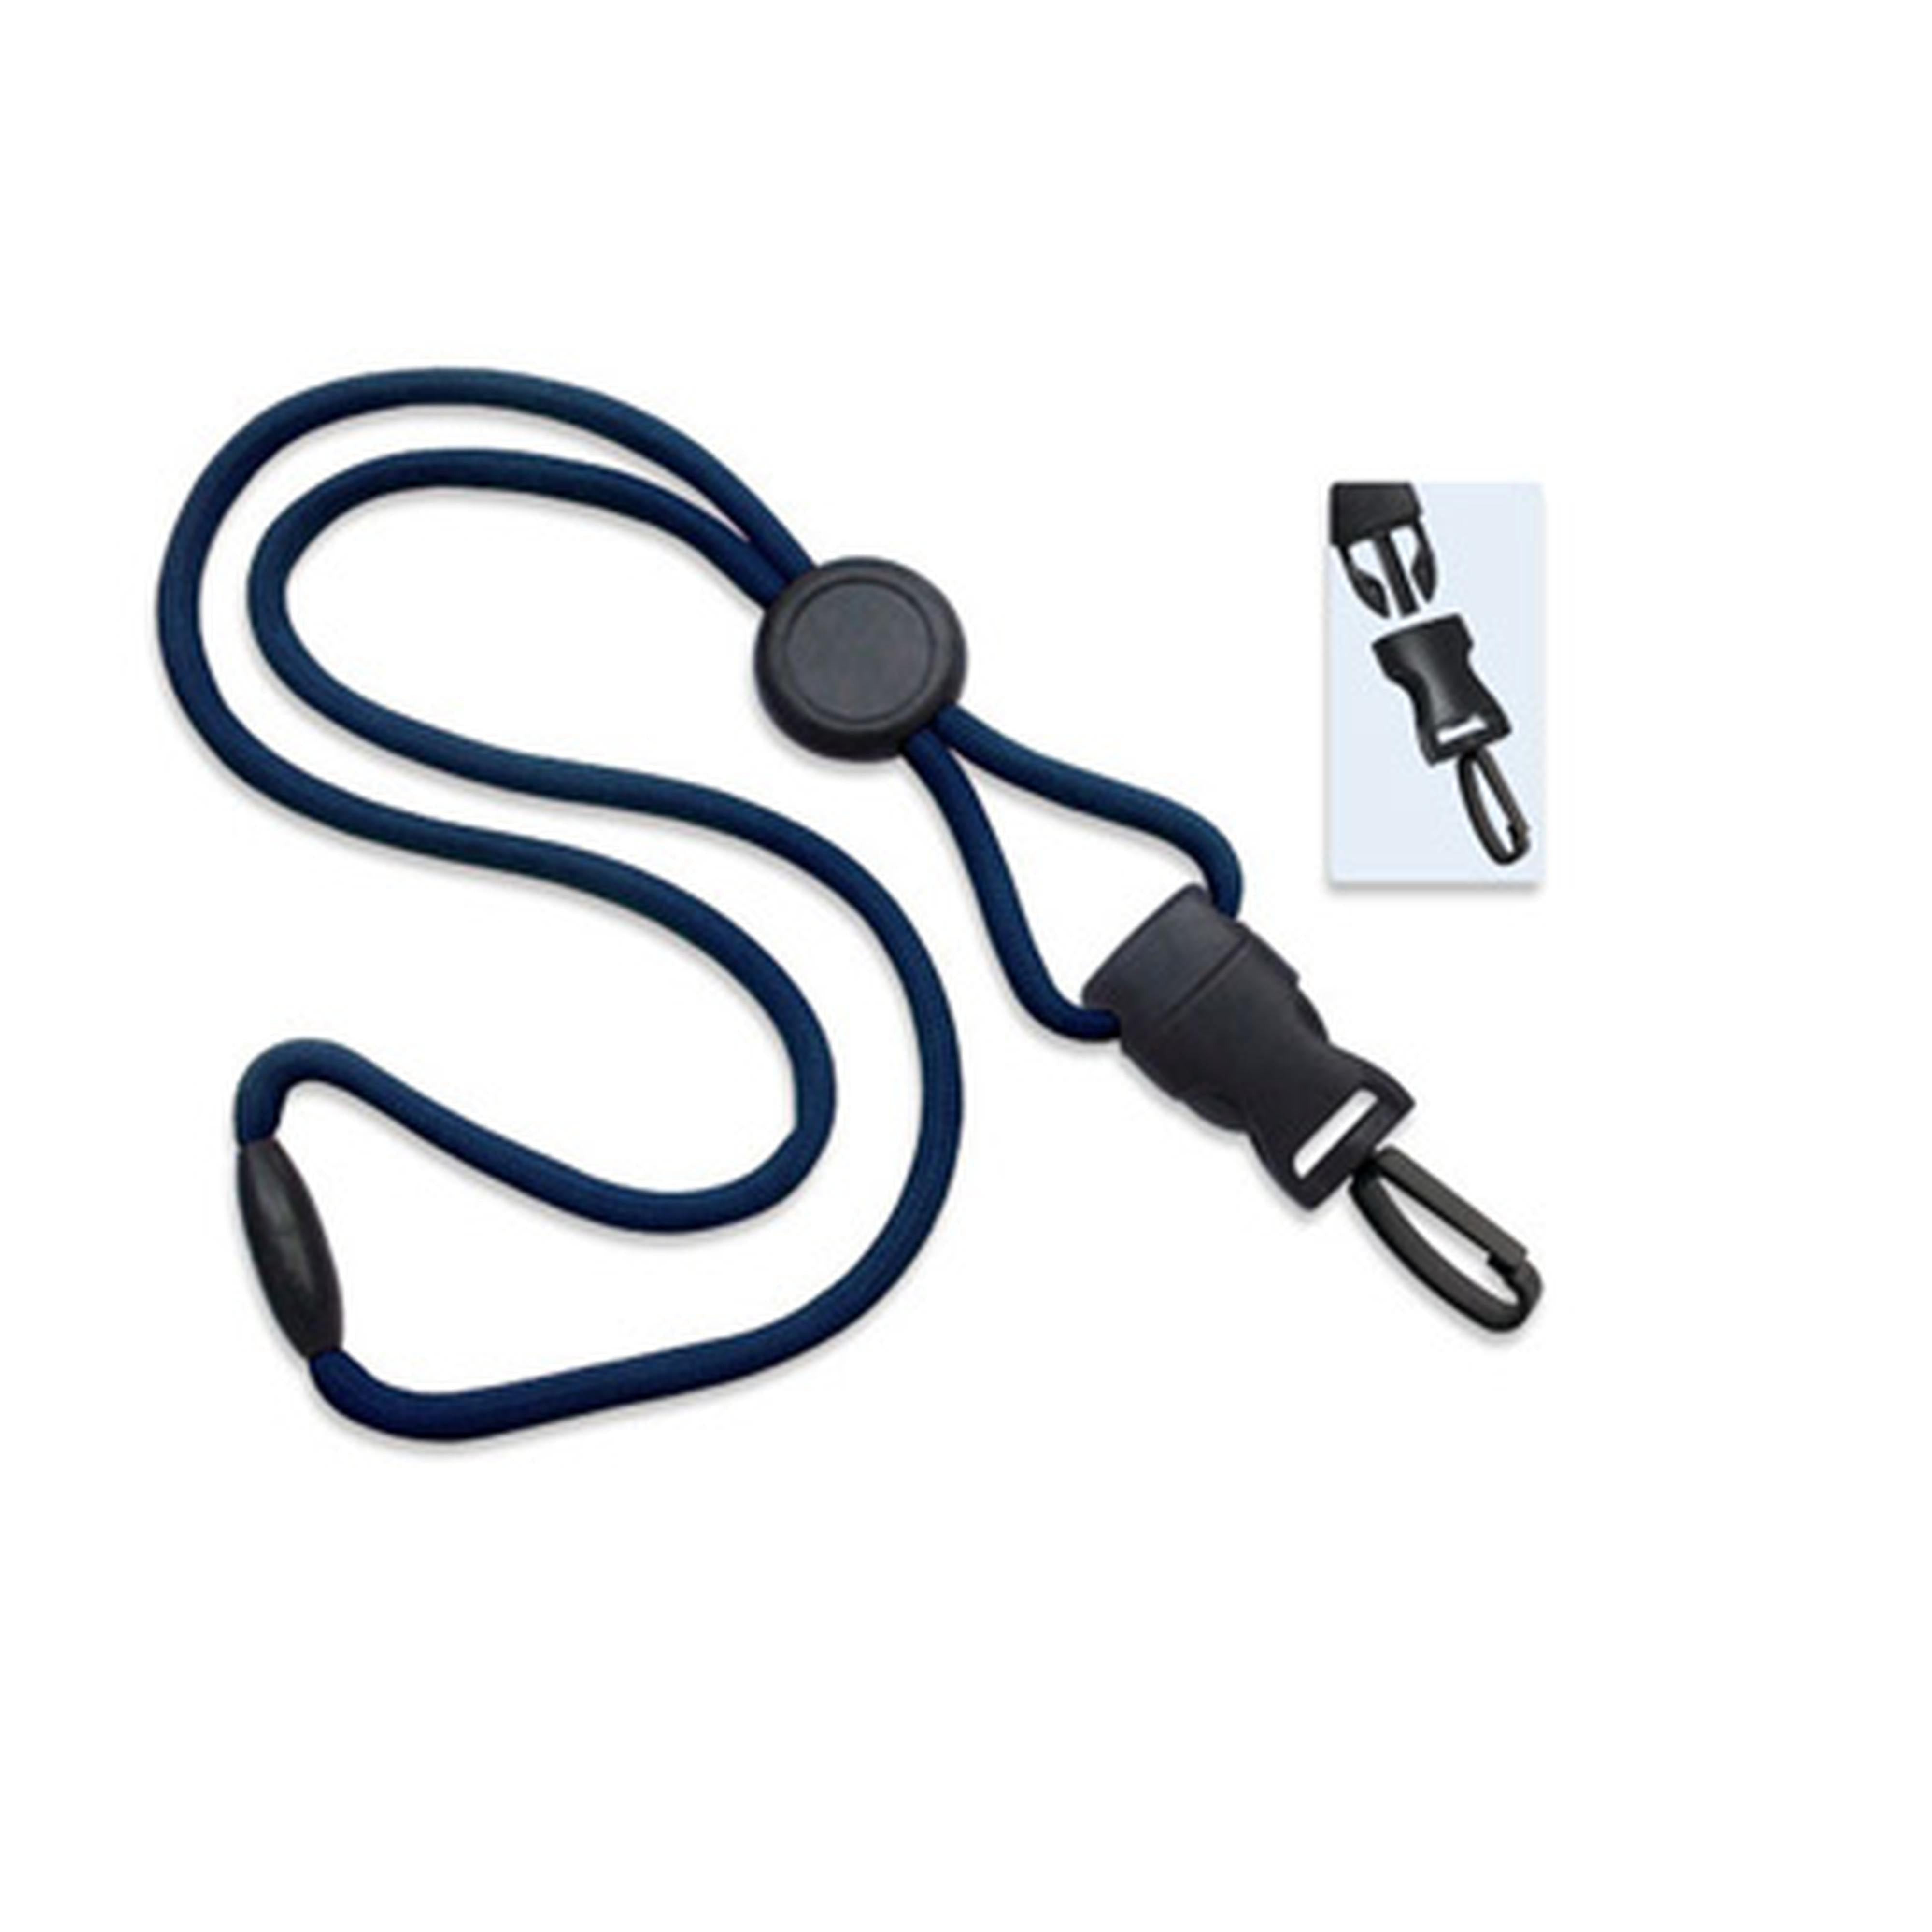 1/4 Round Breakaway Lanyard with DTACH End Fitting Navy Blue / Plastic Swivel Hook